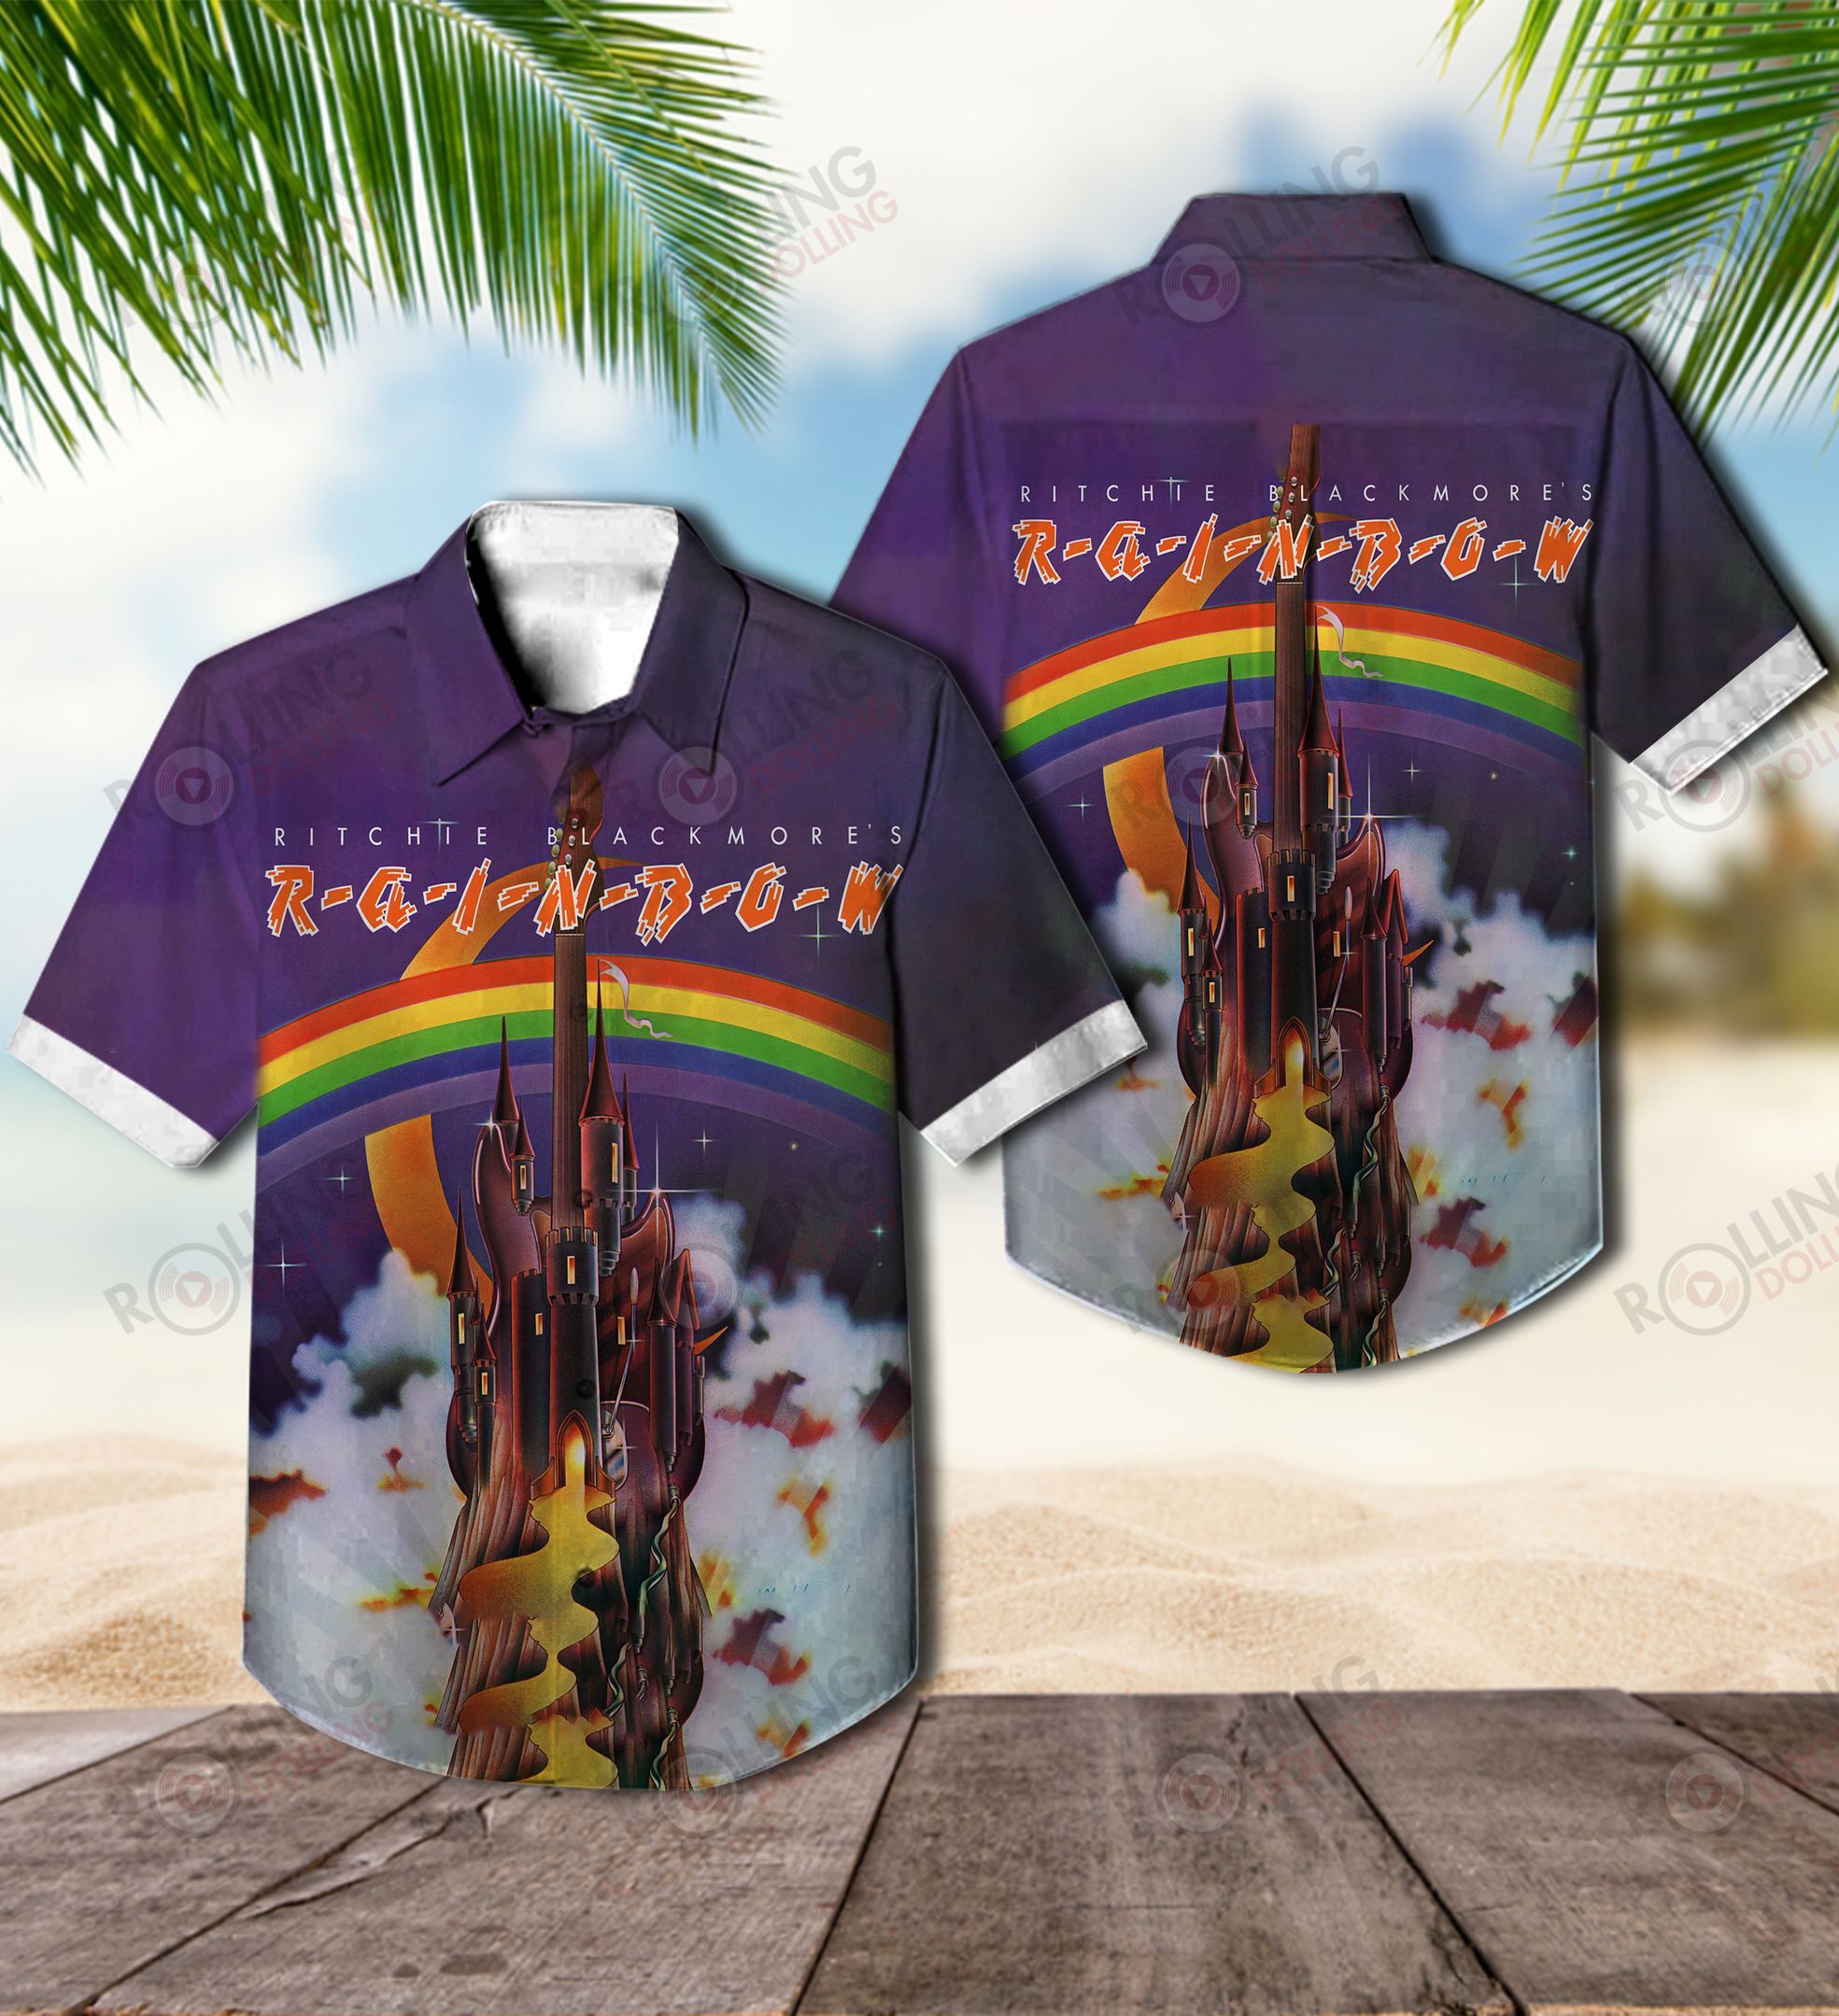 We have compiled a list of some of the best Hawaiian shirt that are available 11